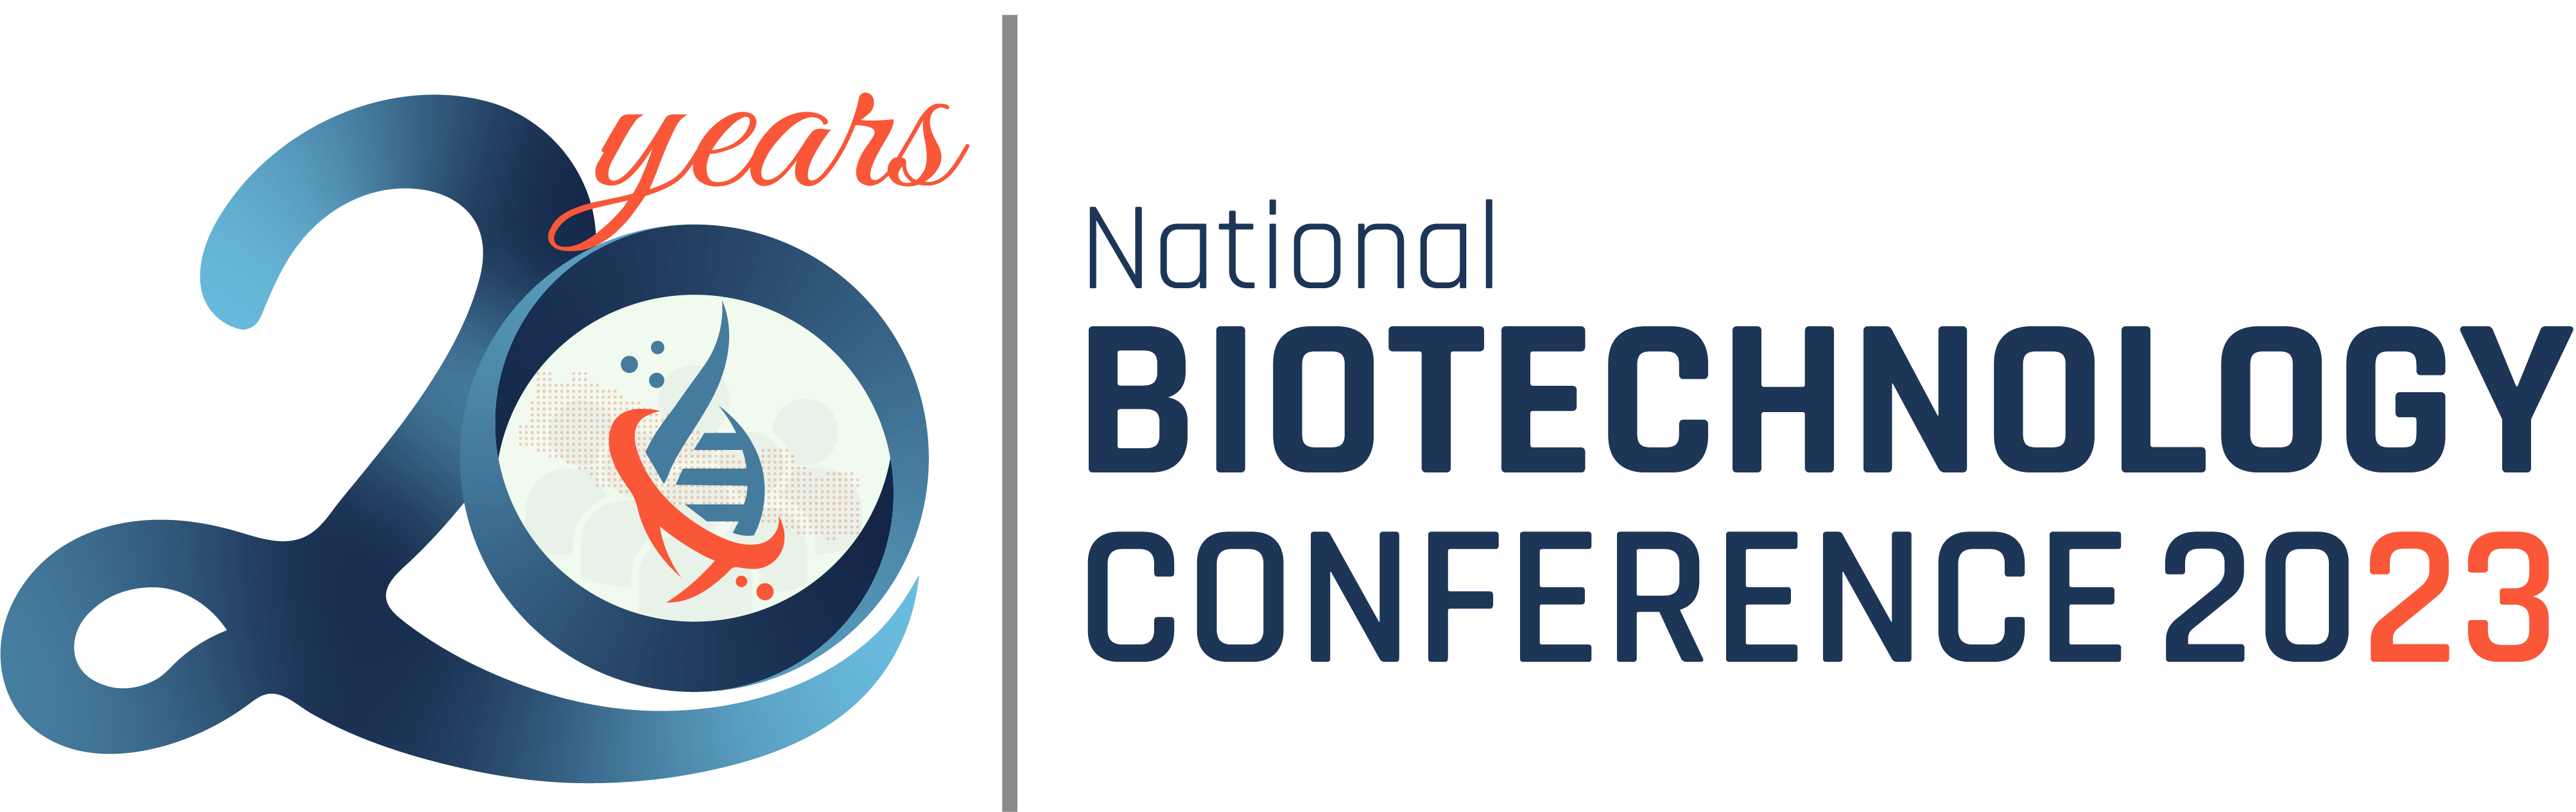 NBC 2023 Logo » National Biotechnology Conference 2023 Home